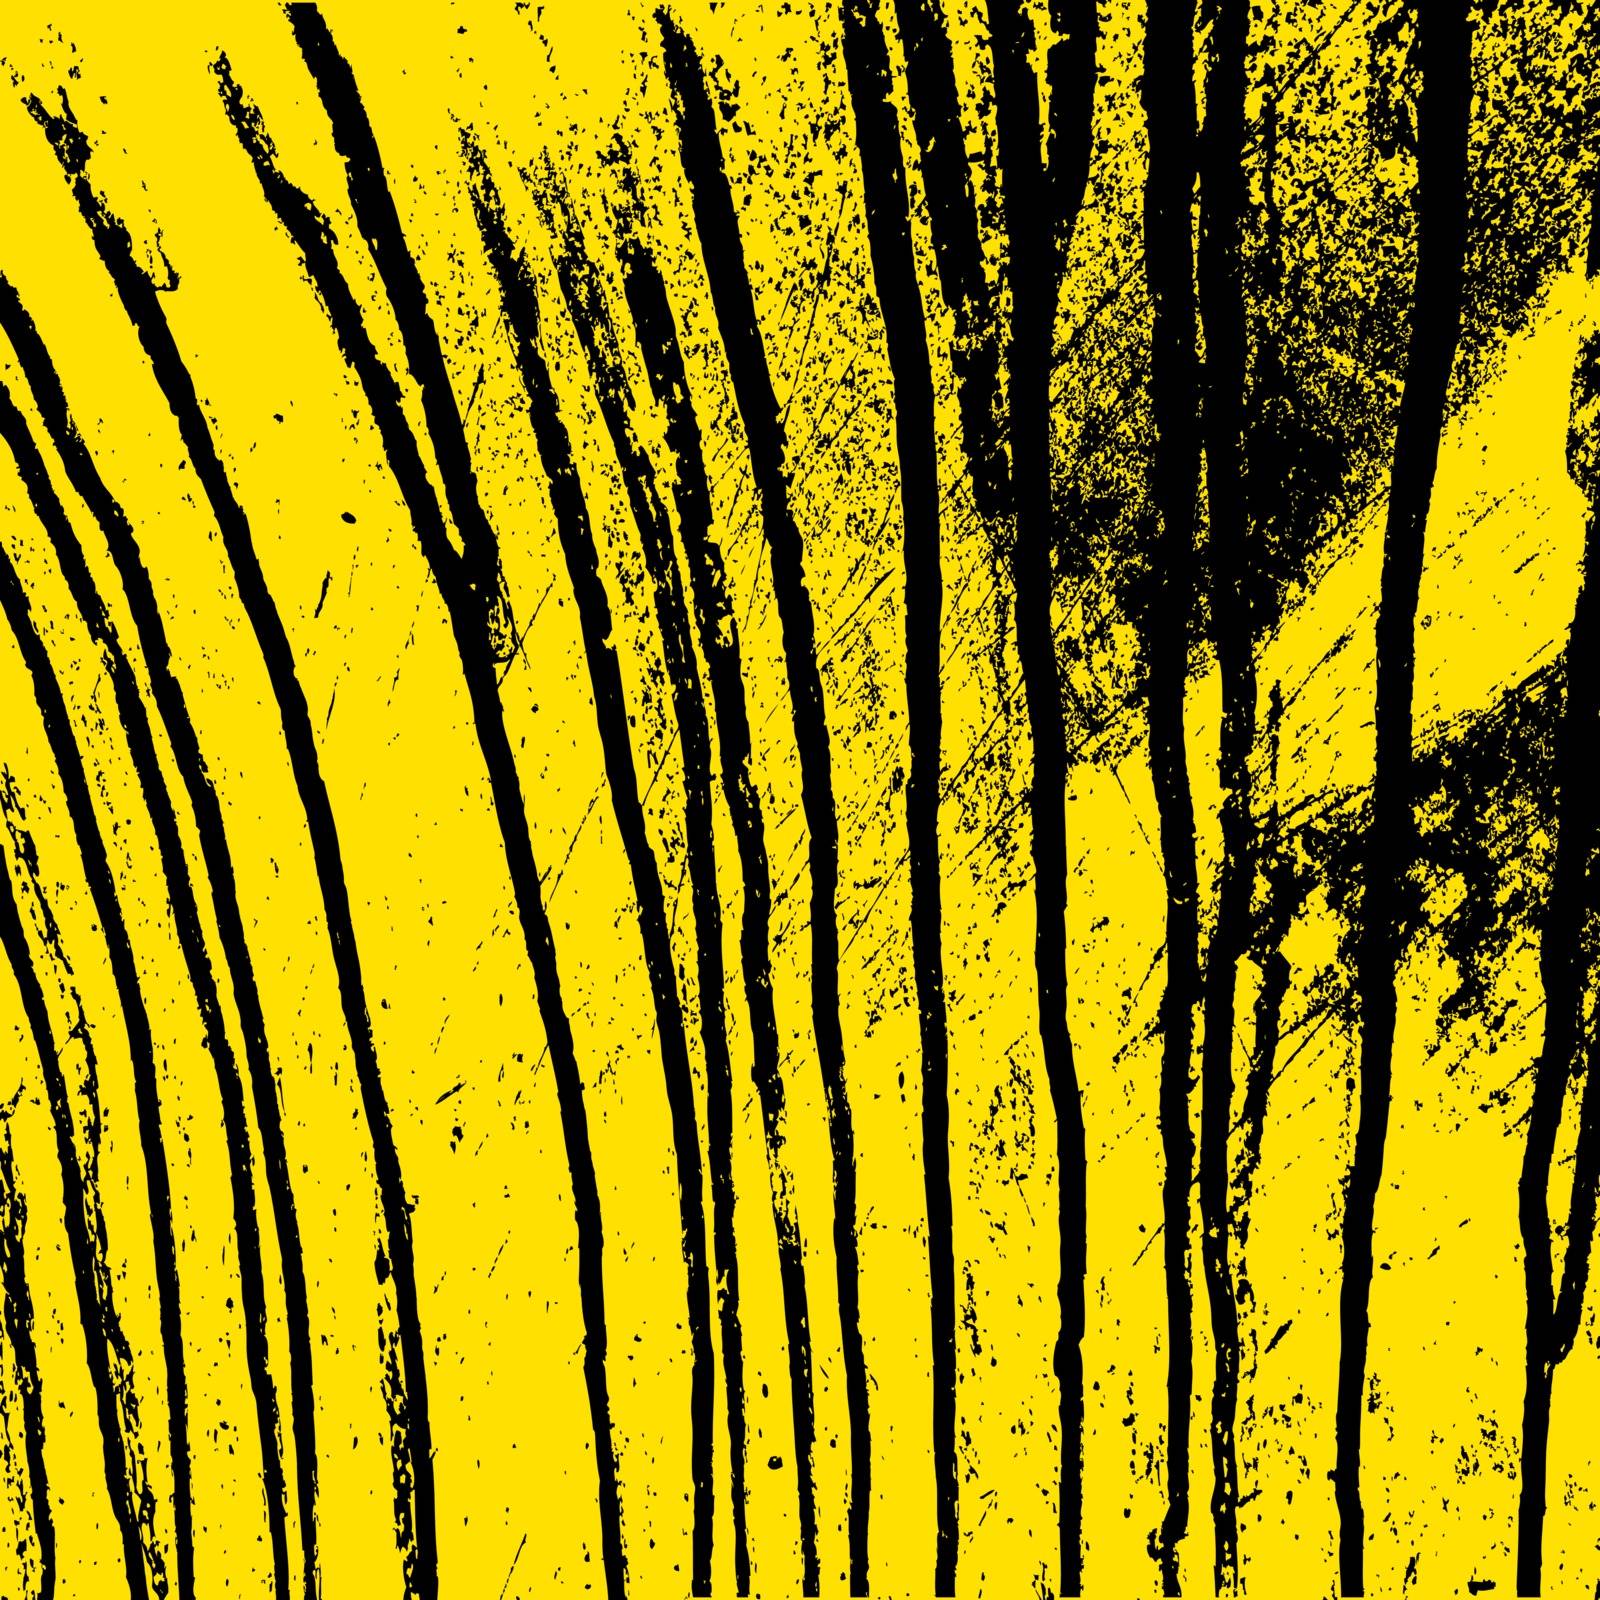 Texture yellow wall with black streaks stains. Vector illustration.